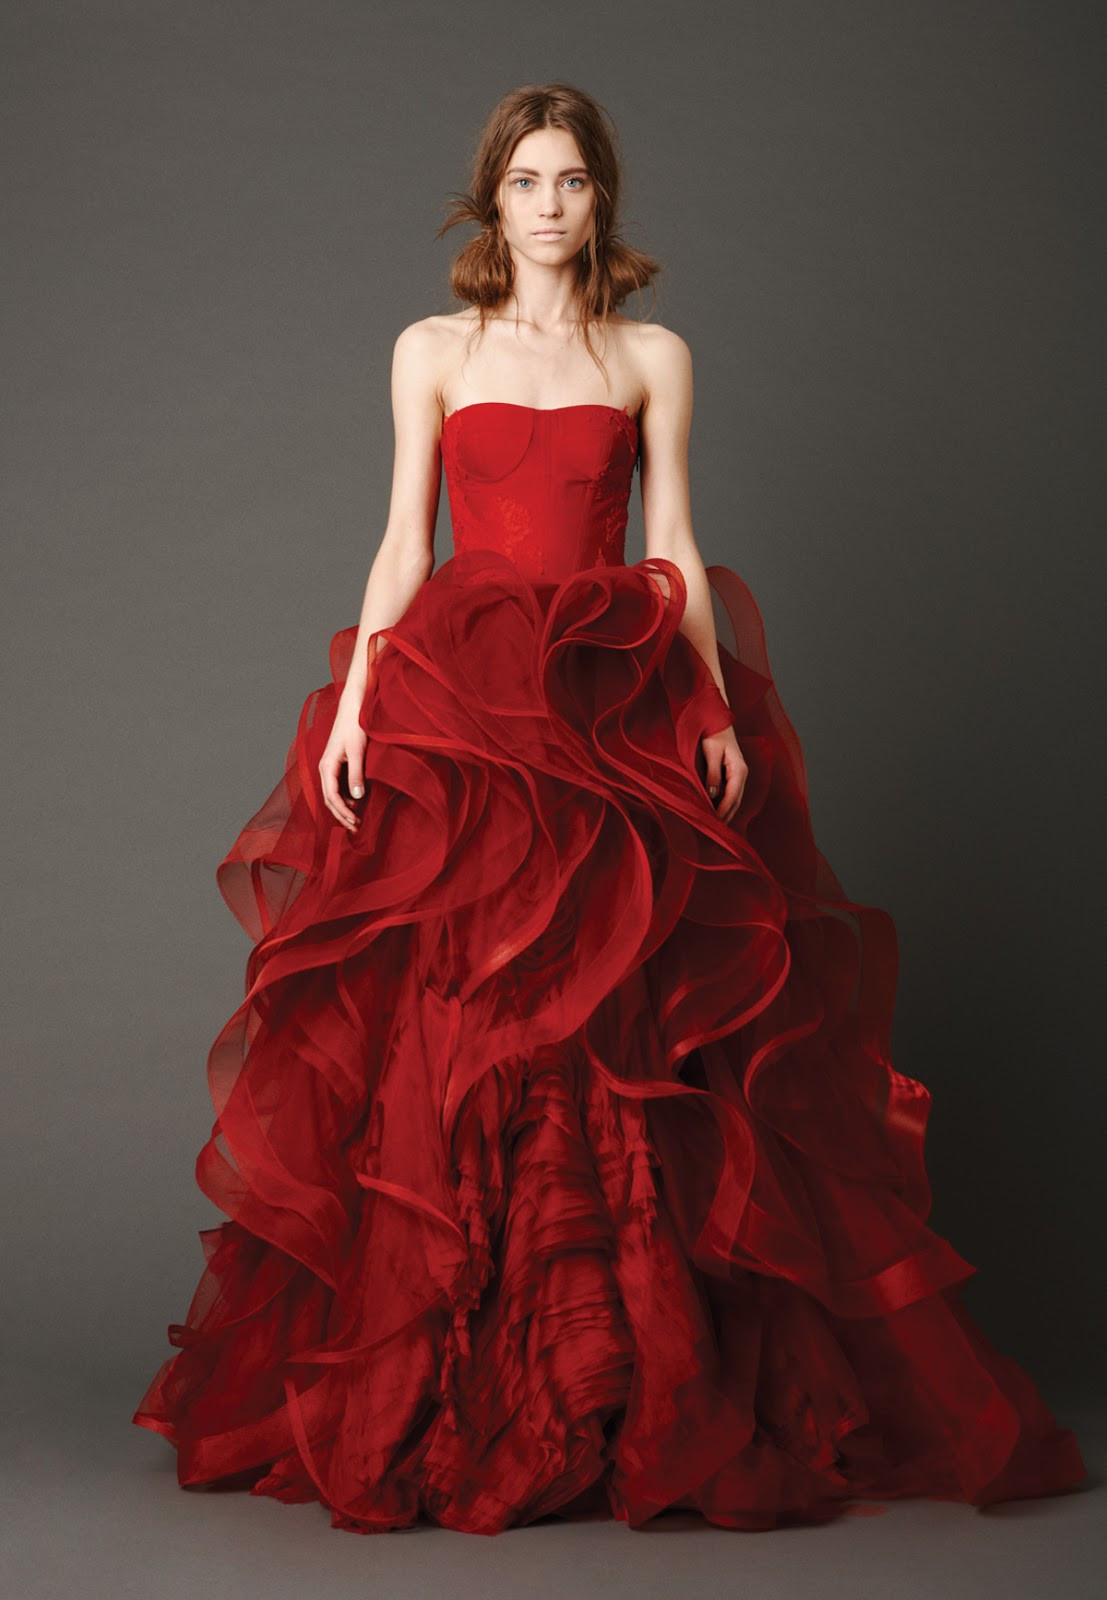 Red Dresses For Wedding
 DressyBridal Learn Wedding Dresses 2013 Trends from Vera